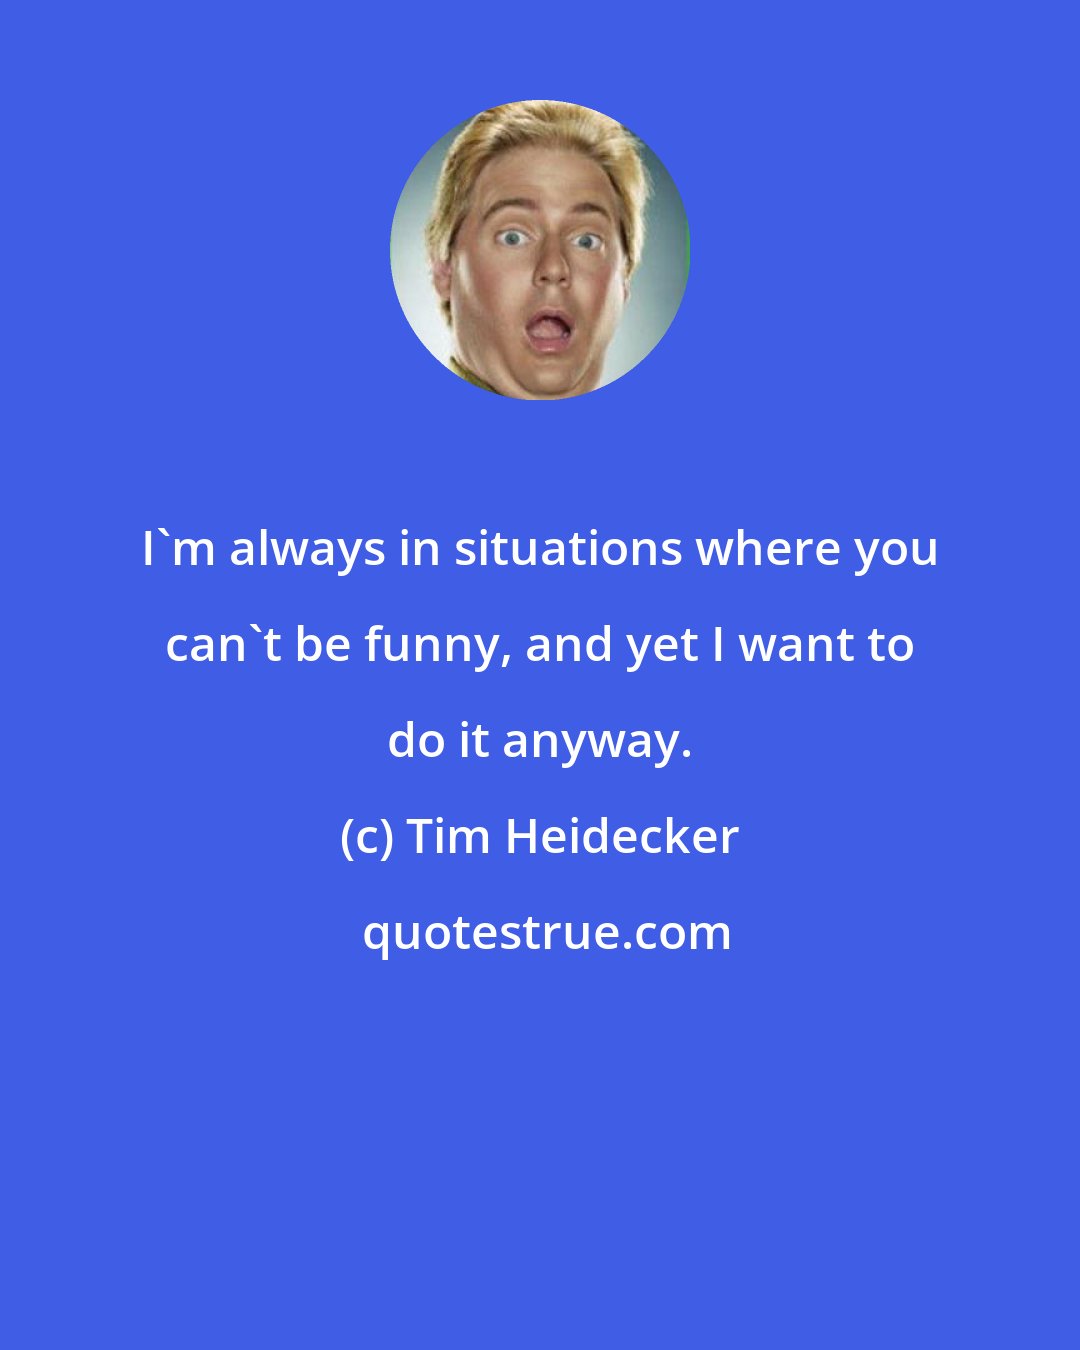 Tim Heidecker: I'm always in situations where you can't be funny, and yet I want to do it anyway.